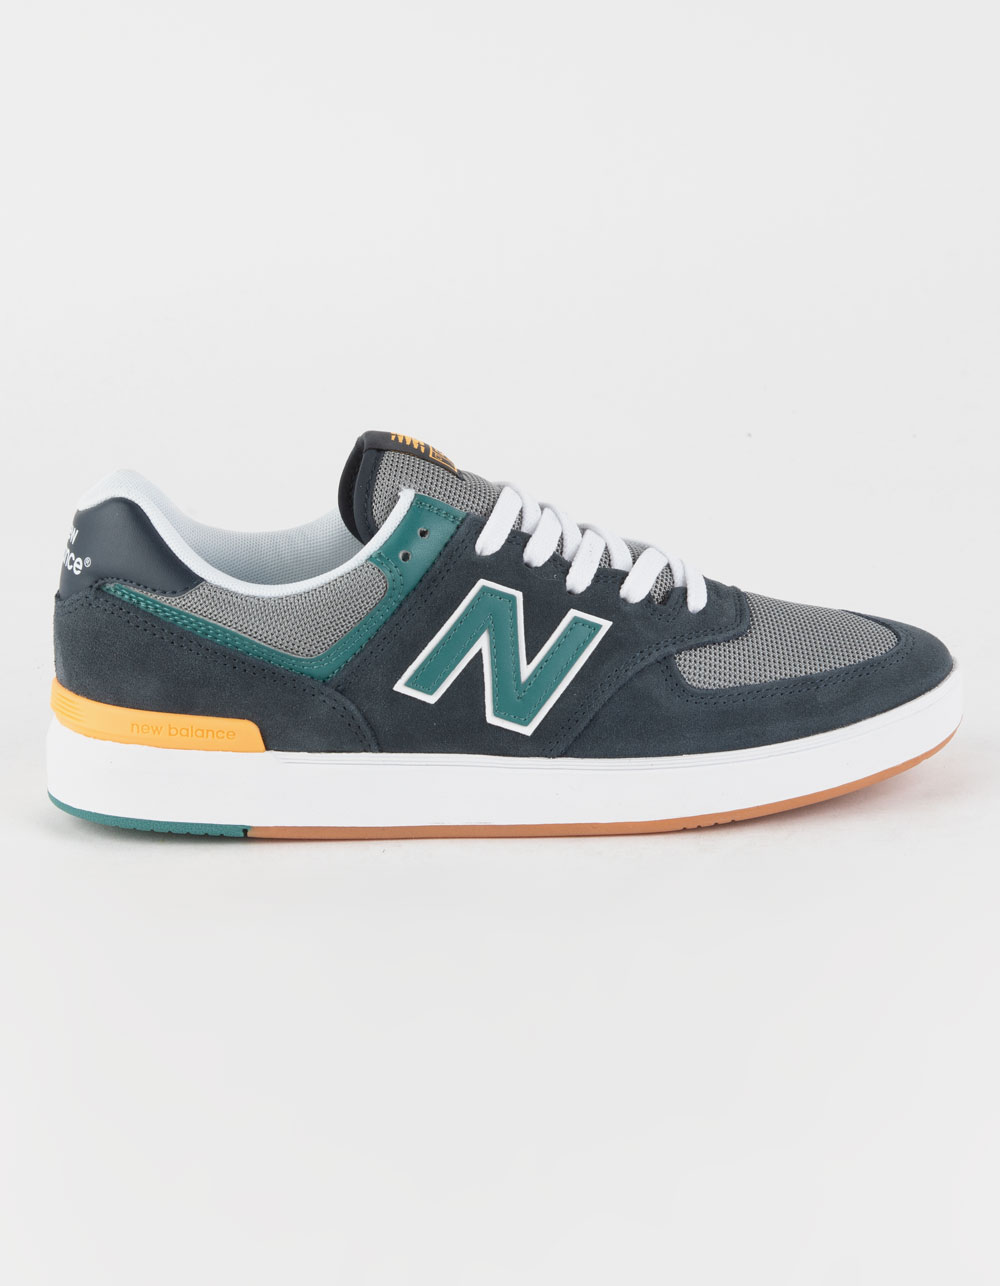 NEW BALANCE CT574 Shoes - BLACK COMBO | Tillys